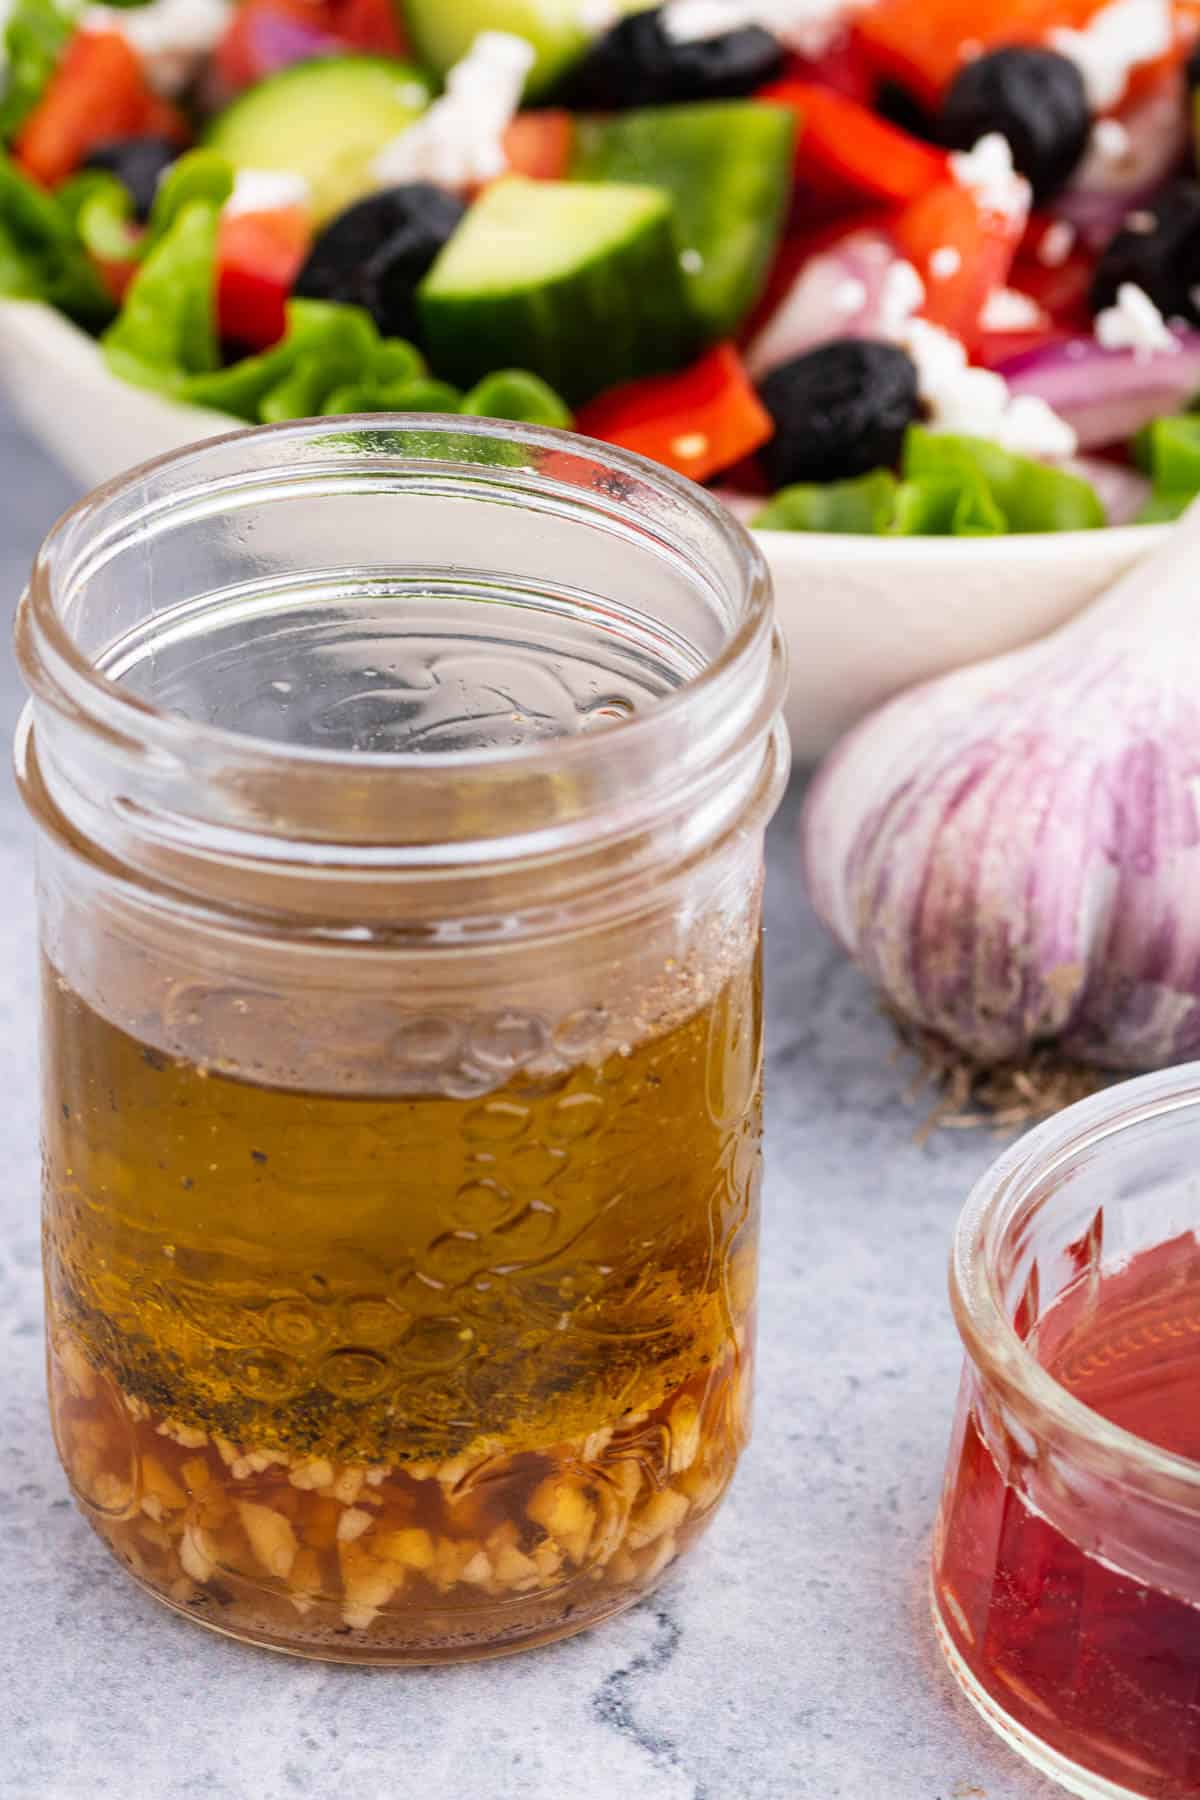 A glass jar containing layers of red wine vinaigrette dressing ingredients.